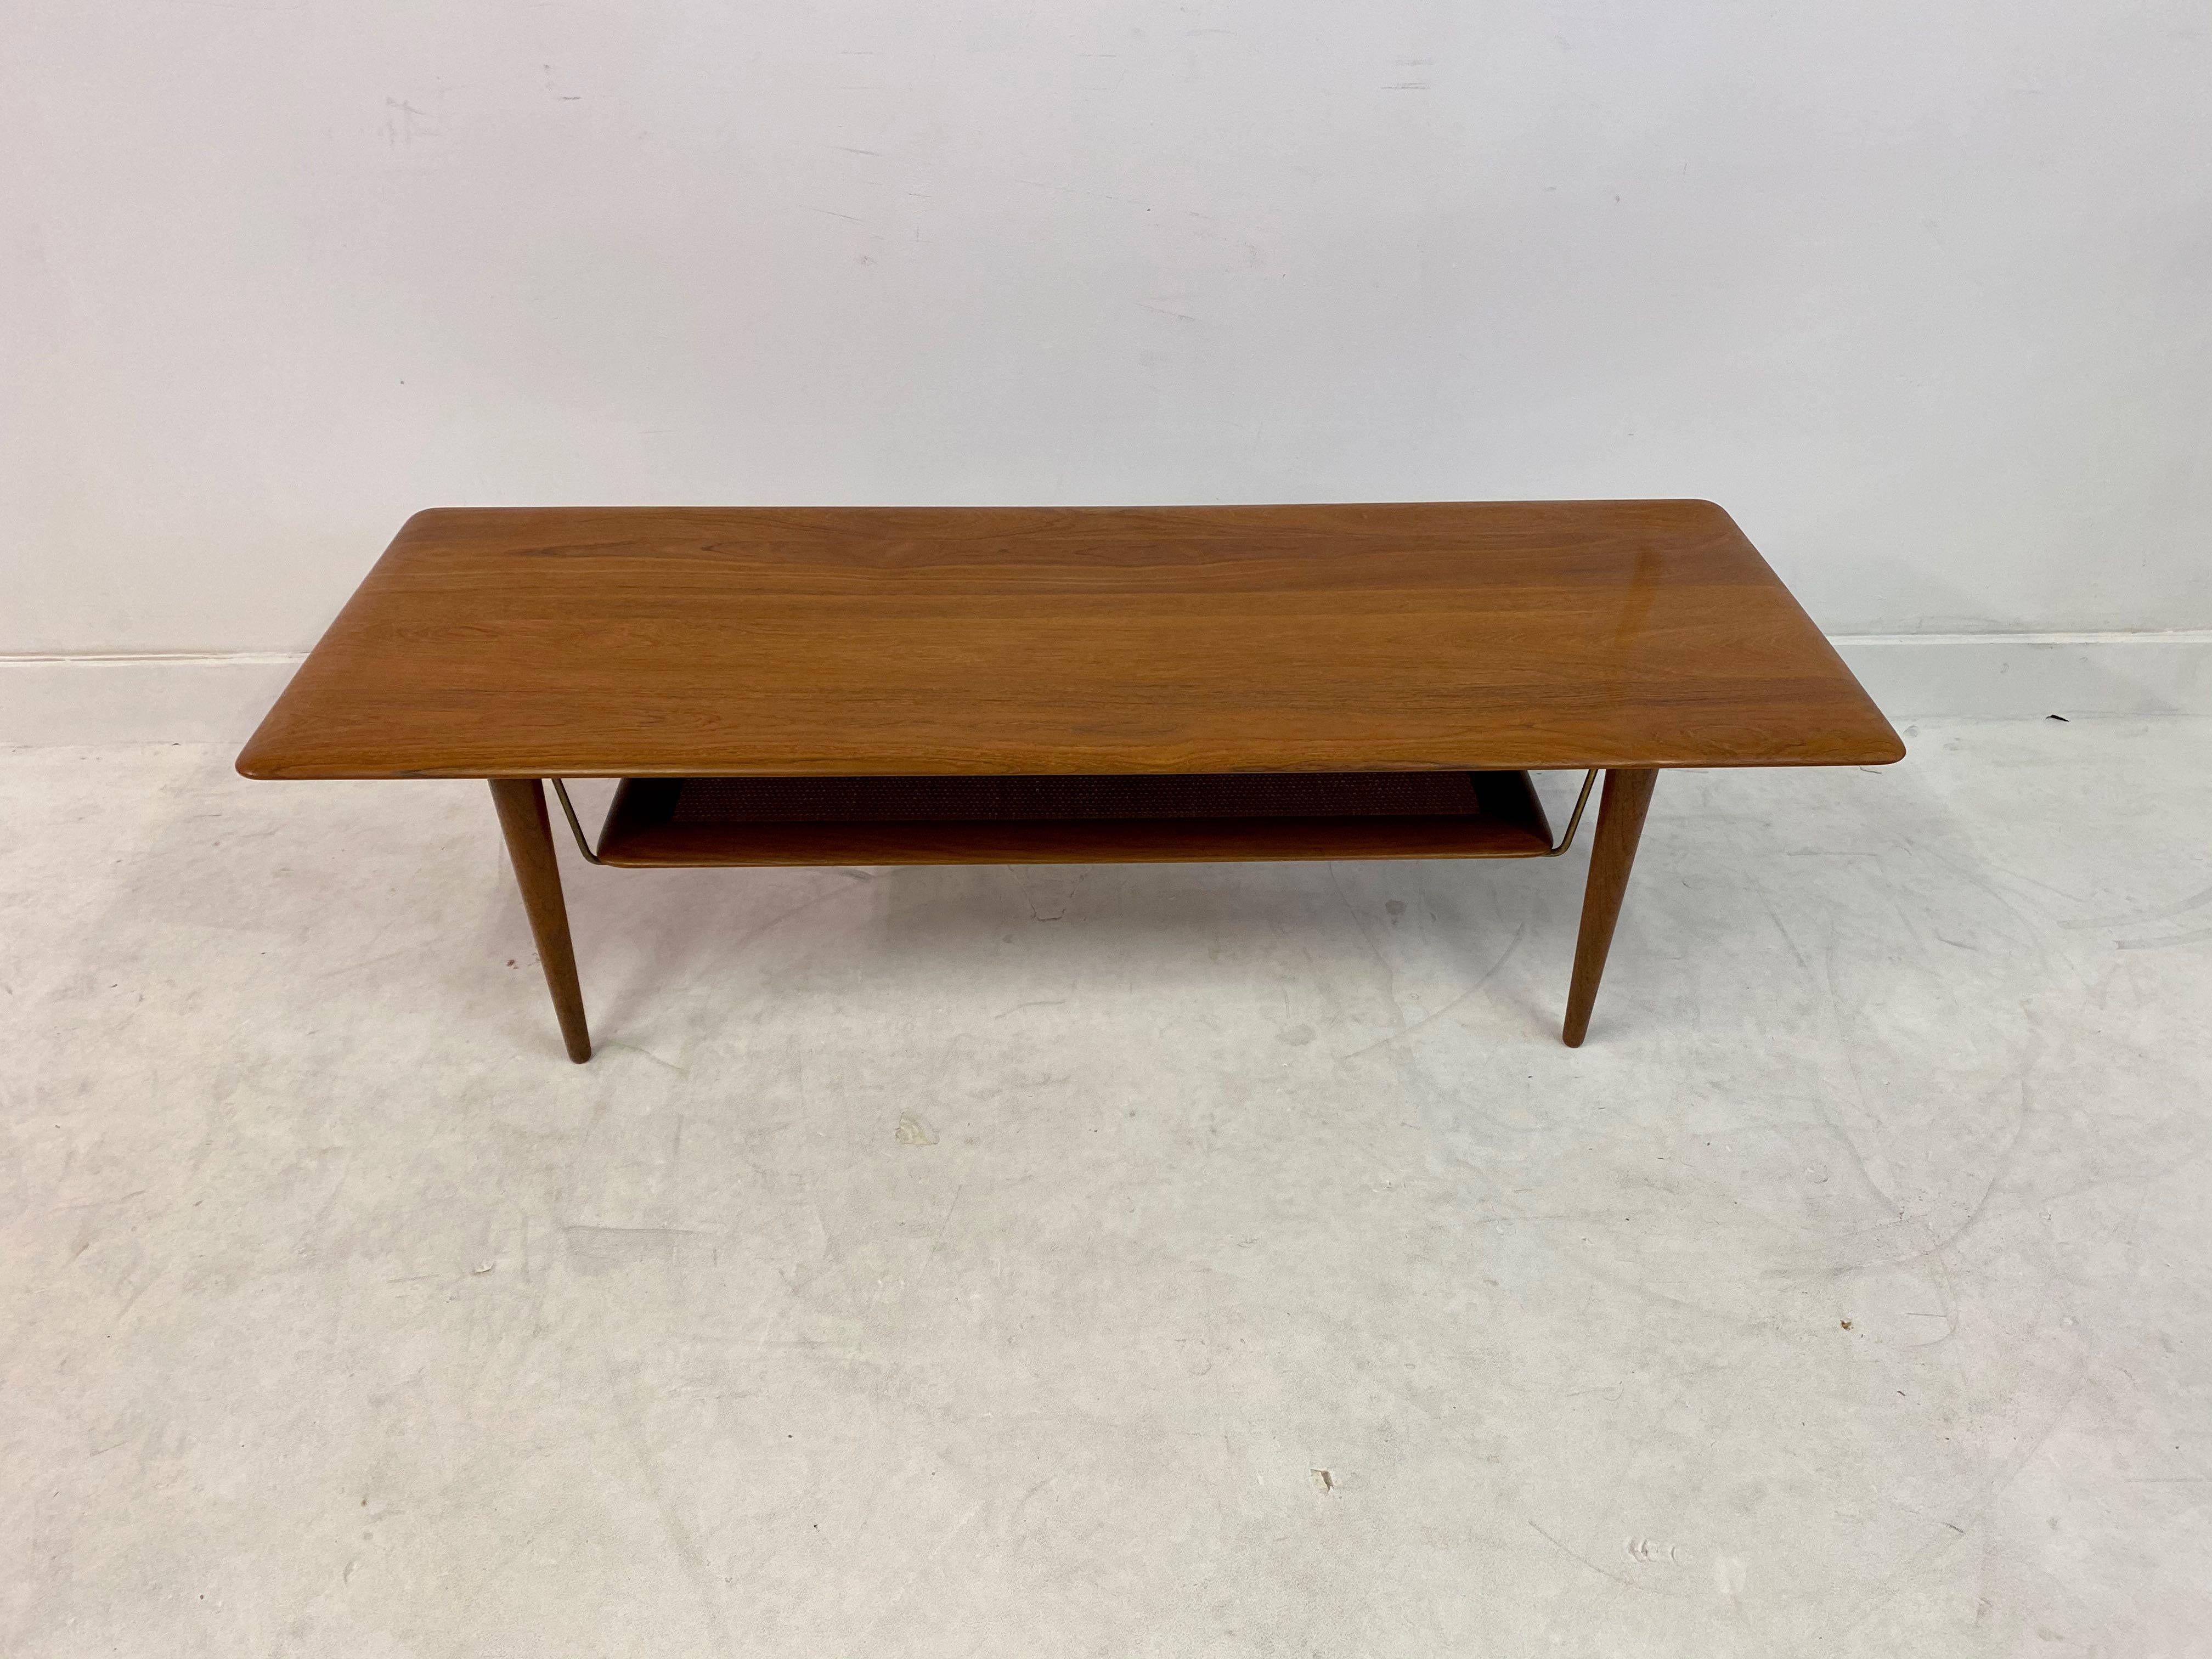 Midcentury teak coffee table

Peter Hvidt and Orla Molgaard

For France and Son

Wicker under tier

Professionally restored,

1960s, Denmark.